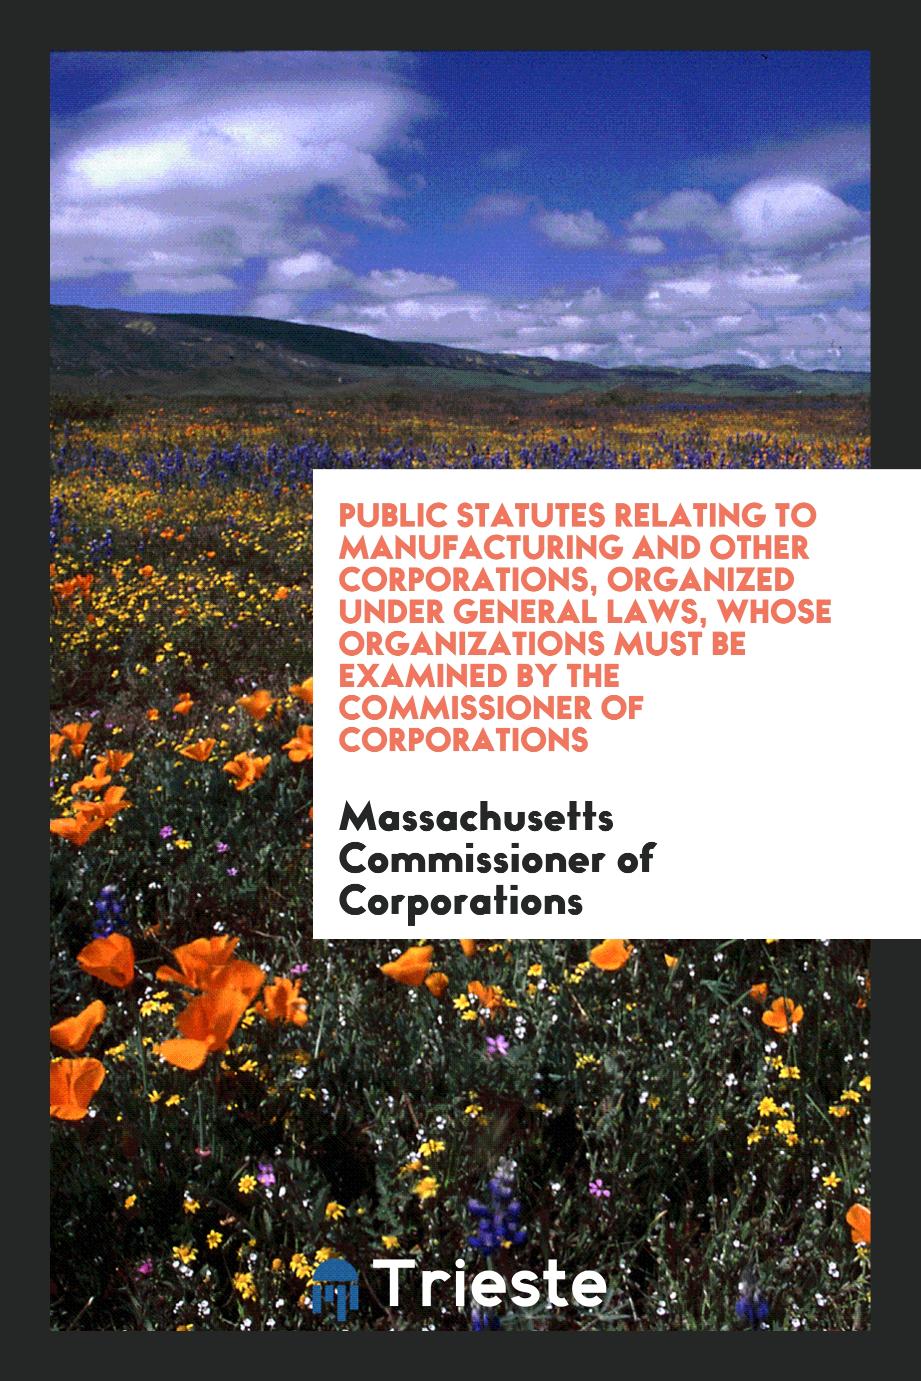 Public Statutes Relating to Manufacturing and Other Corporations, Organized under general laws, whose organizations must be examined by the commissioner of corporations